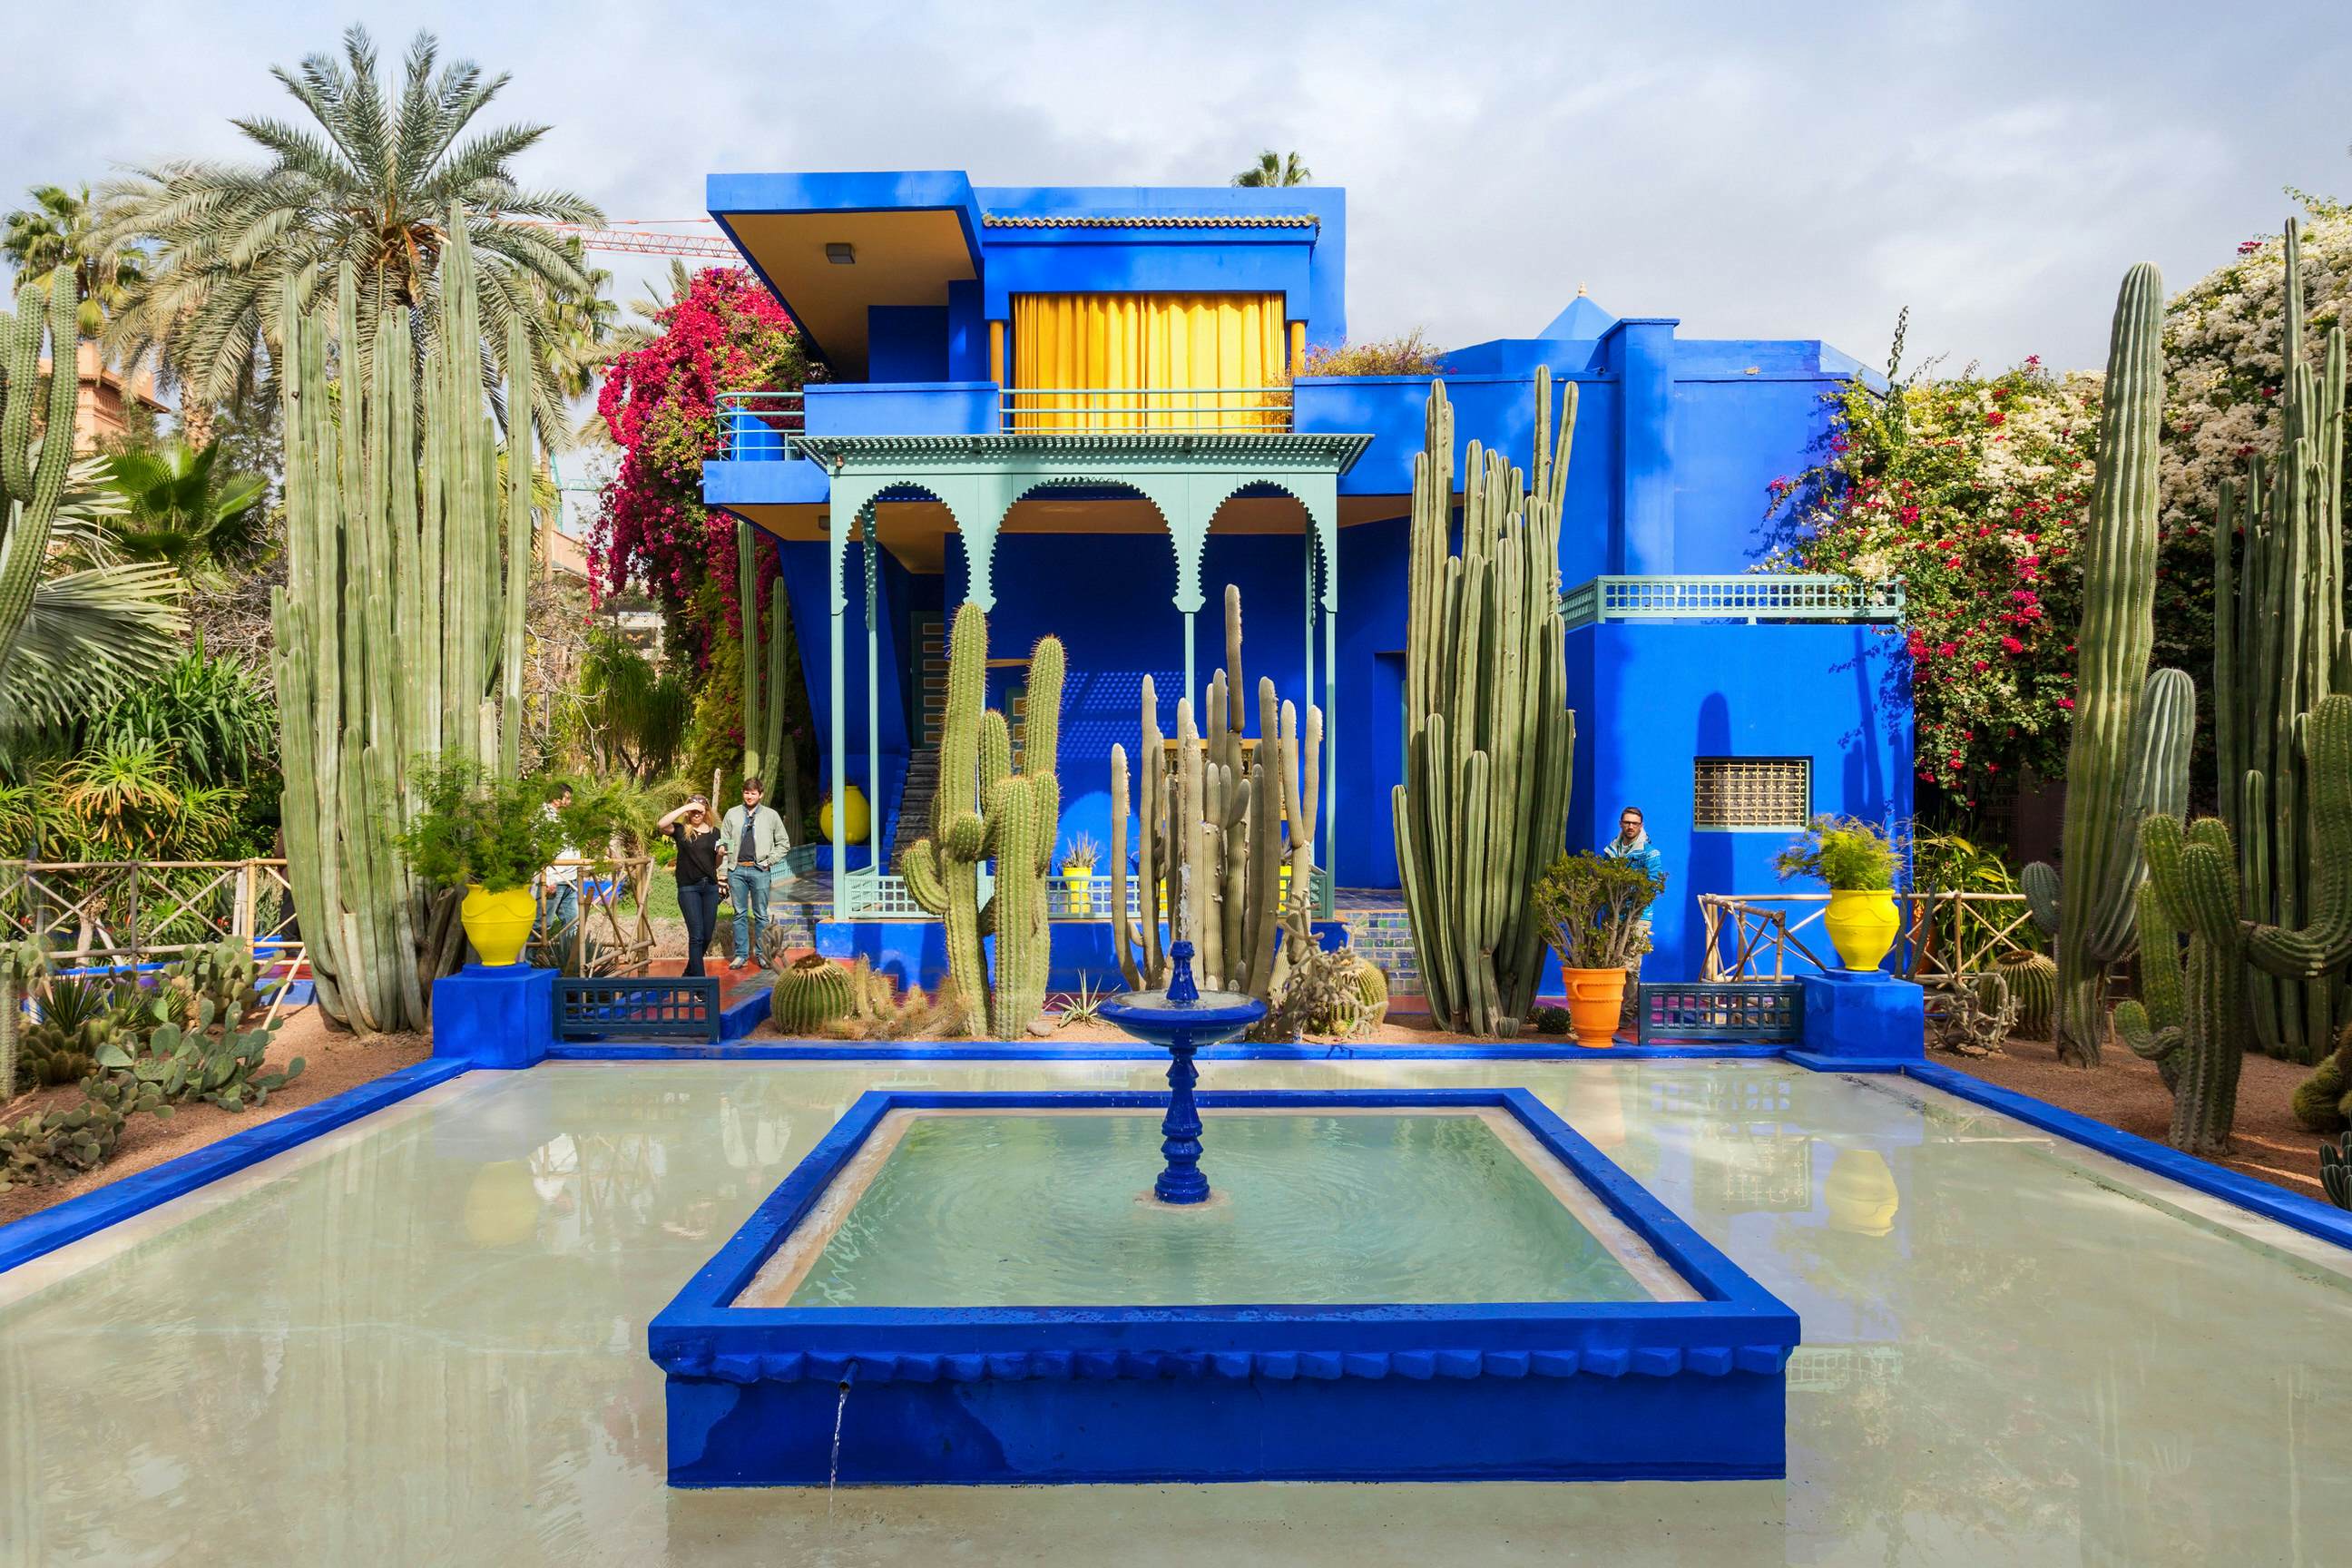 Beat the queues at YSL's Jardin Majorelle - Lonely Planet